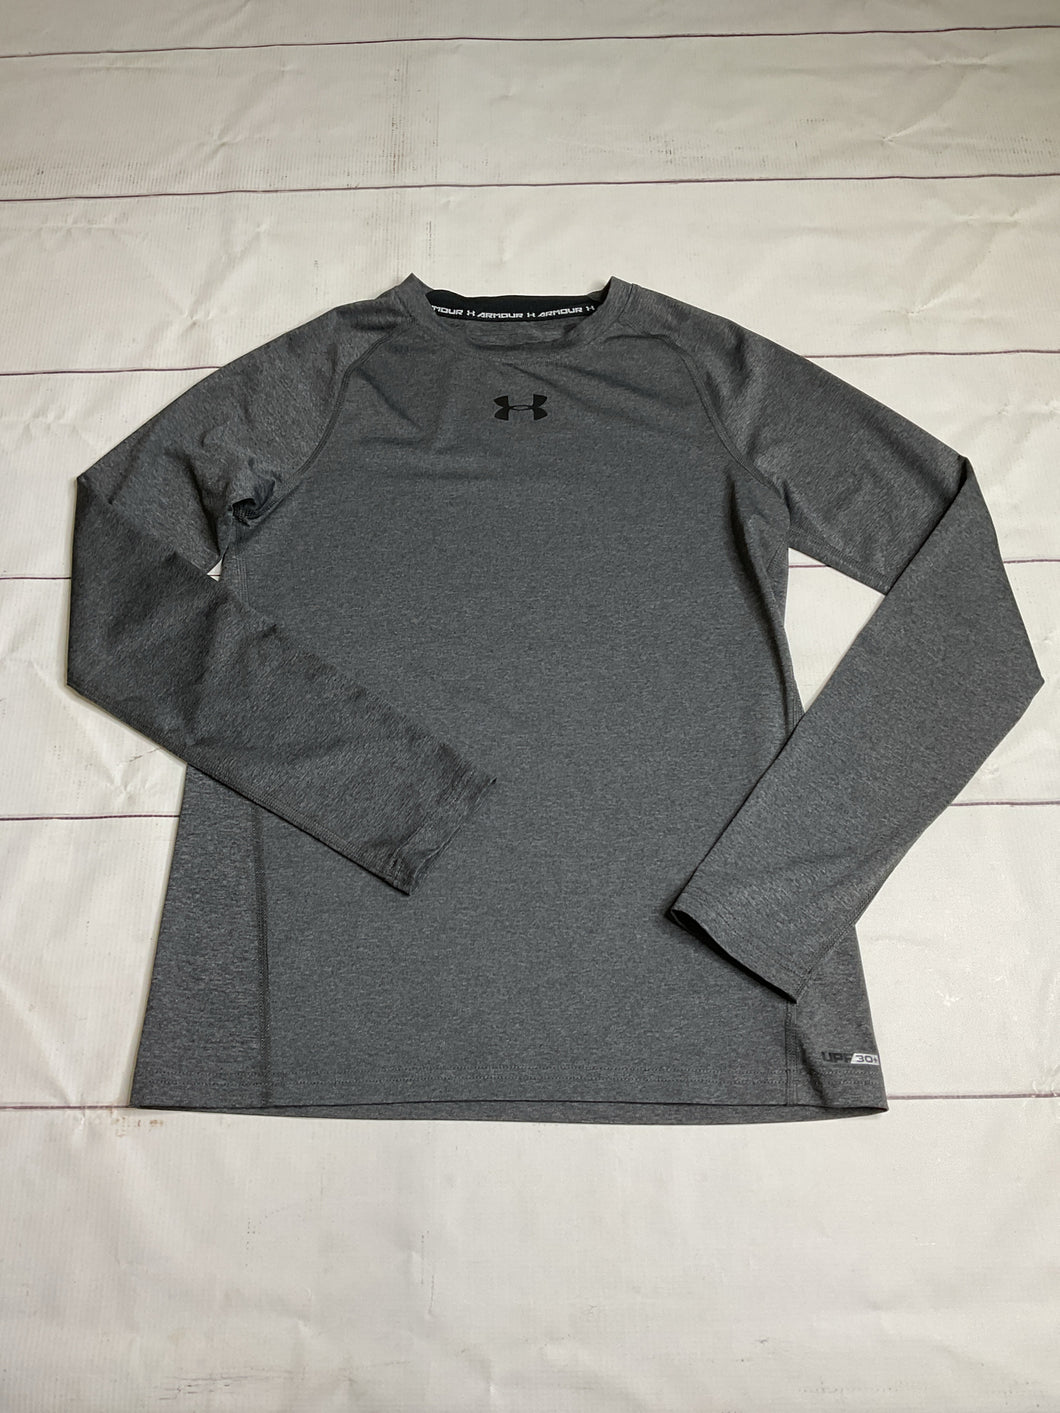 Under Armour Size 18 Compression